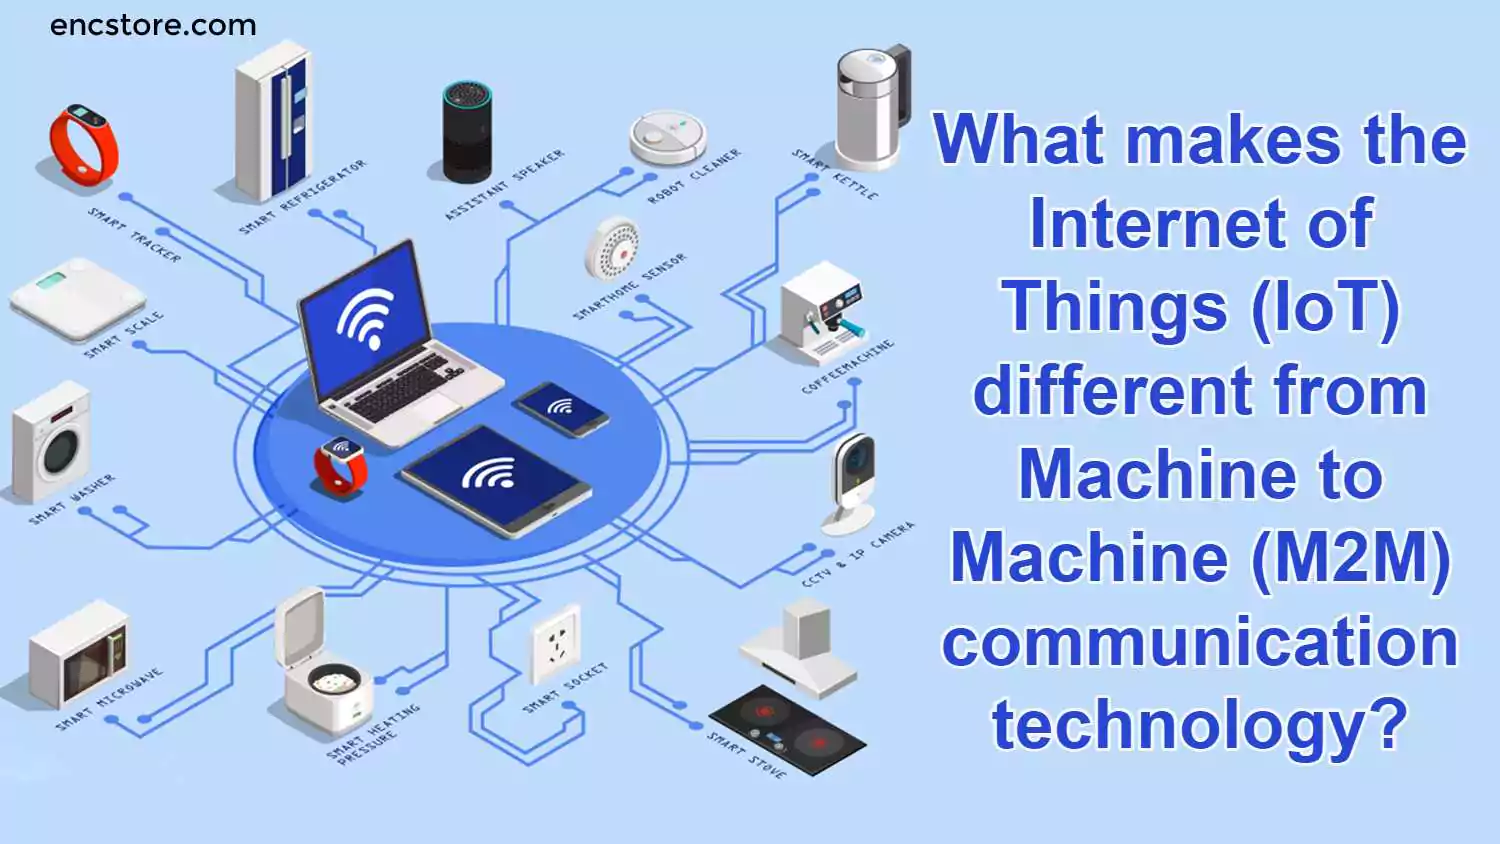 What makes the IoT different from Machine to Machine (M2M) communication technology